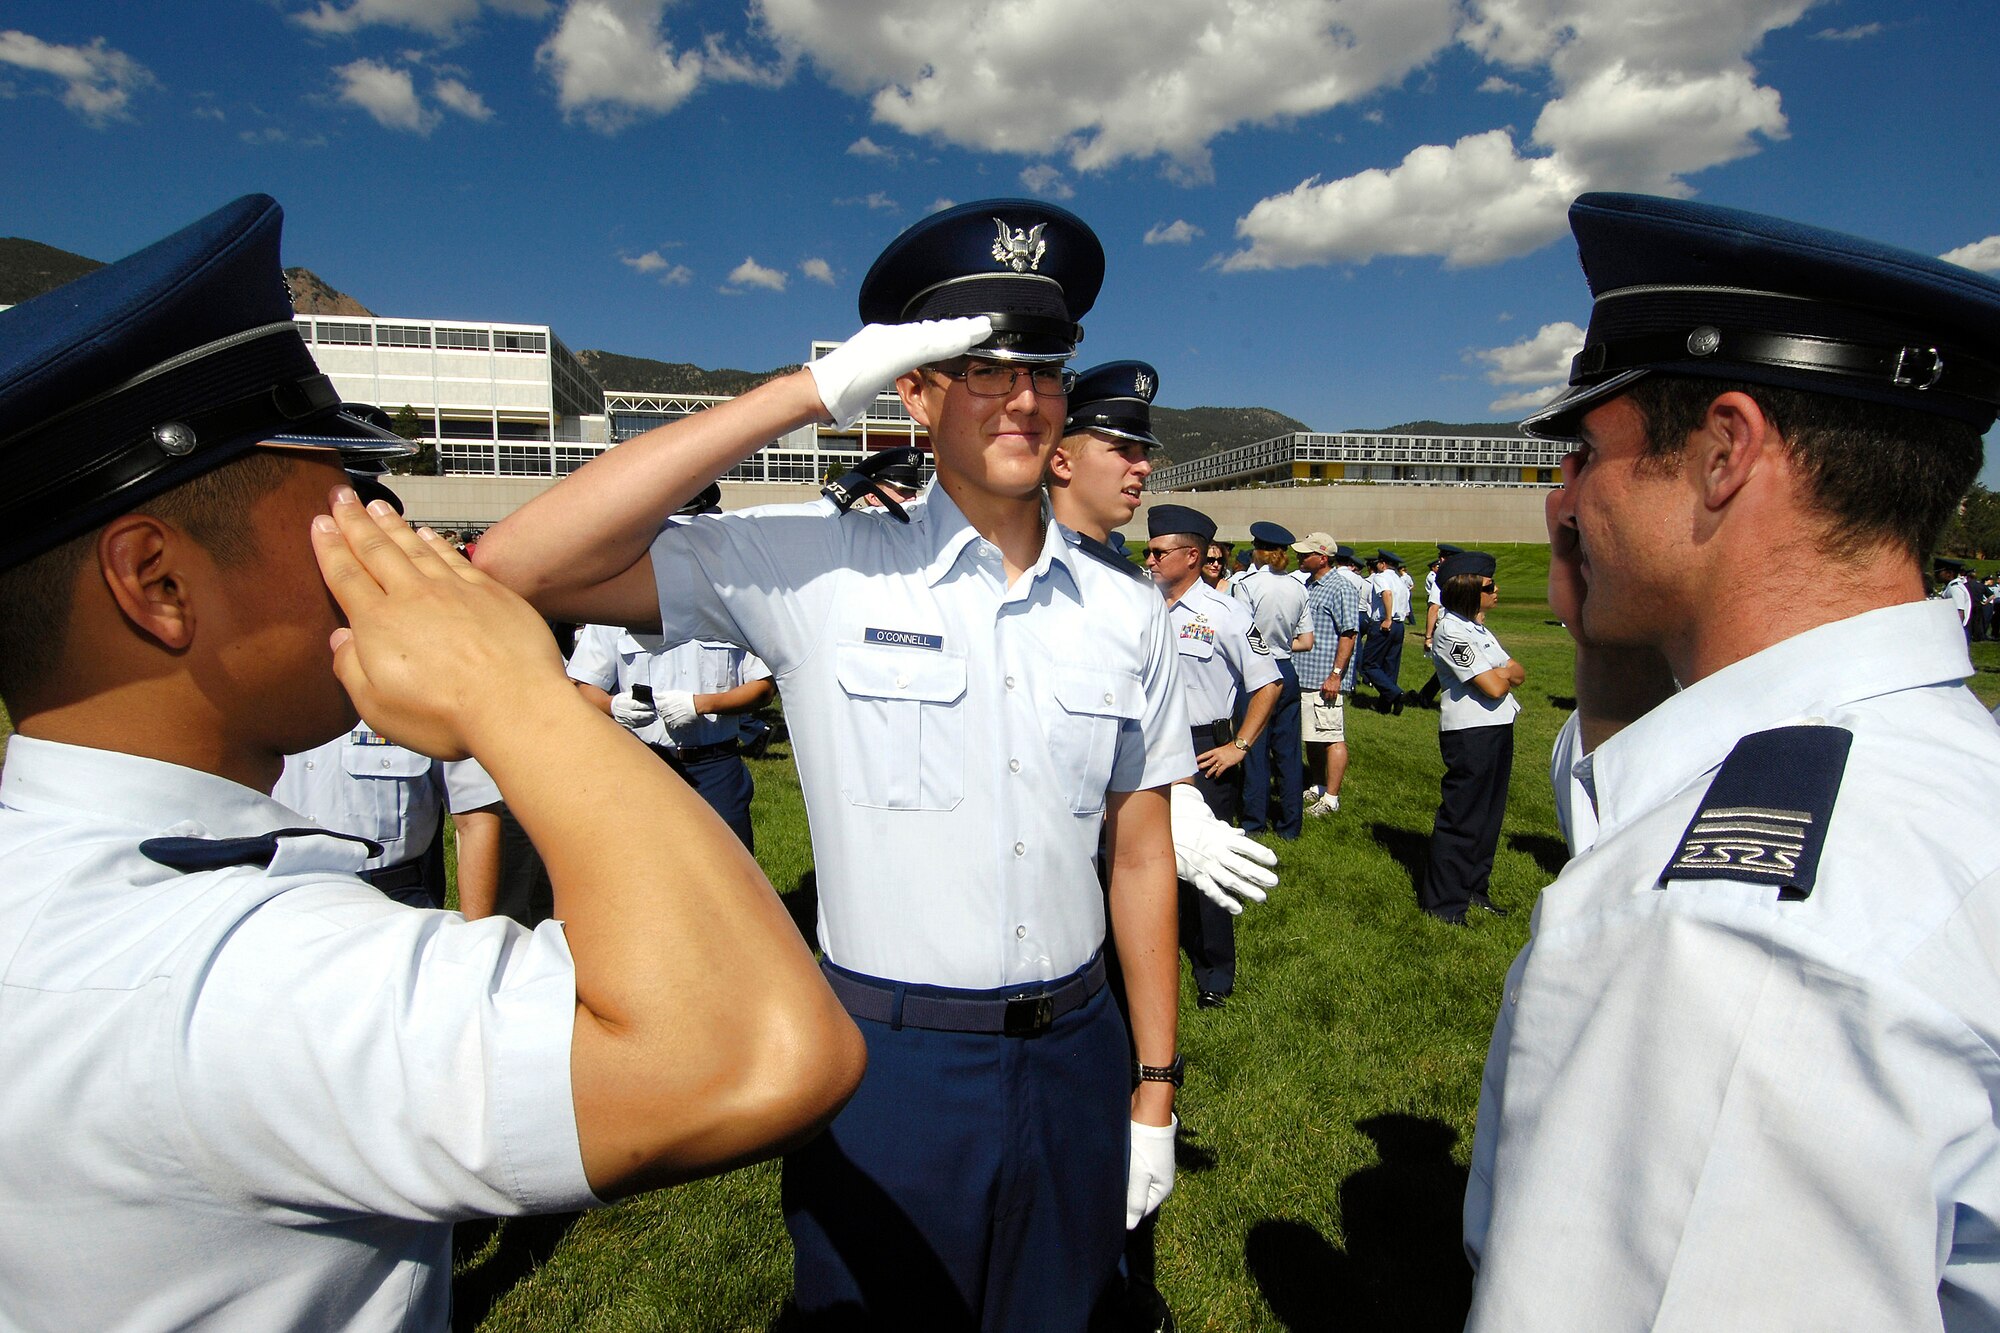 U.S. Air Force Academy Cadet 4th Class Kody O'Connell returns salutes given by Cadet 2nd Class Alexander Paladino and Cadet 1st Class Jason Griggs Aug 6 after they pinned on his shoulder boards on the Stillman Parade Field near Colorado Springs, Colo. (U.S Air Force photo/Mike Kaplan)